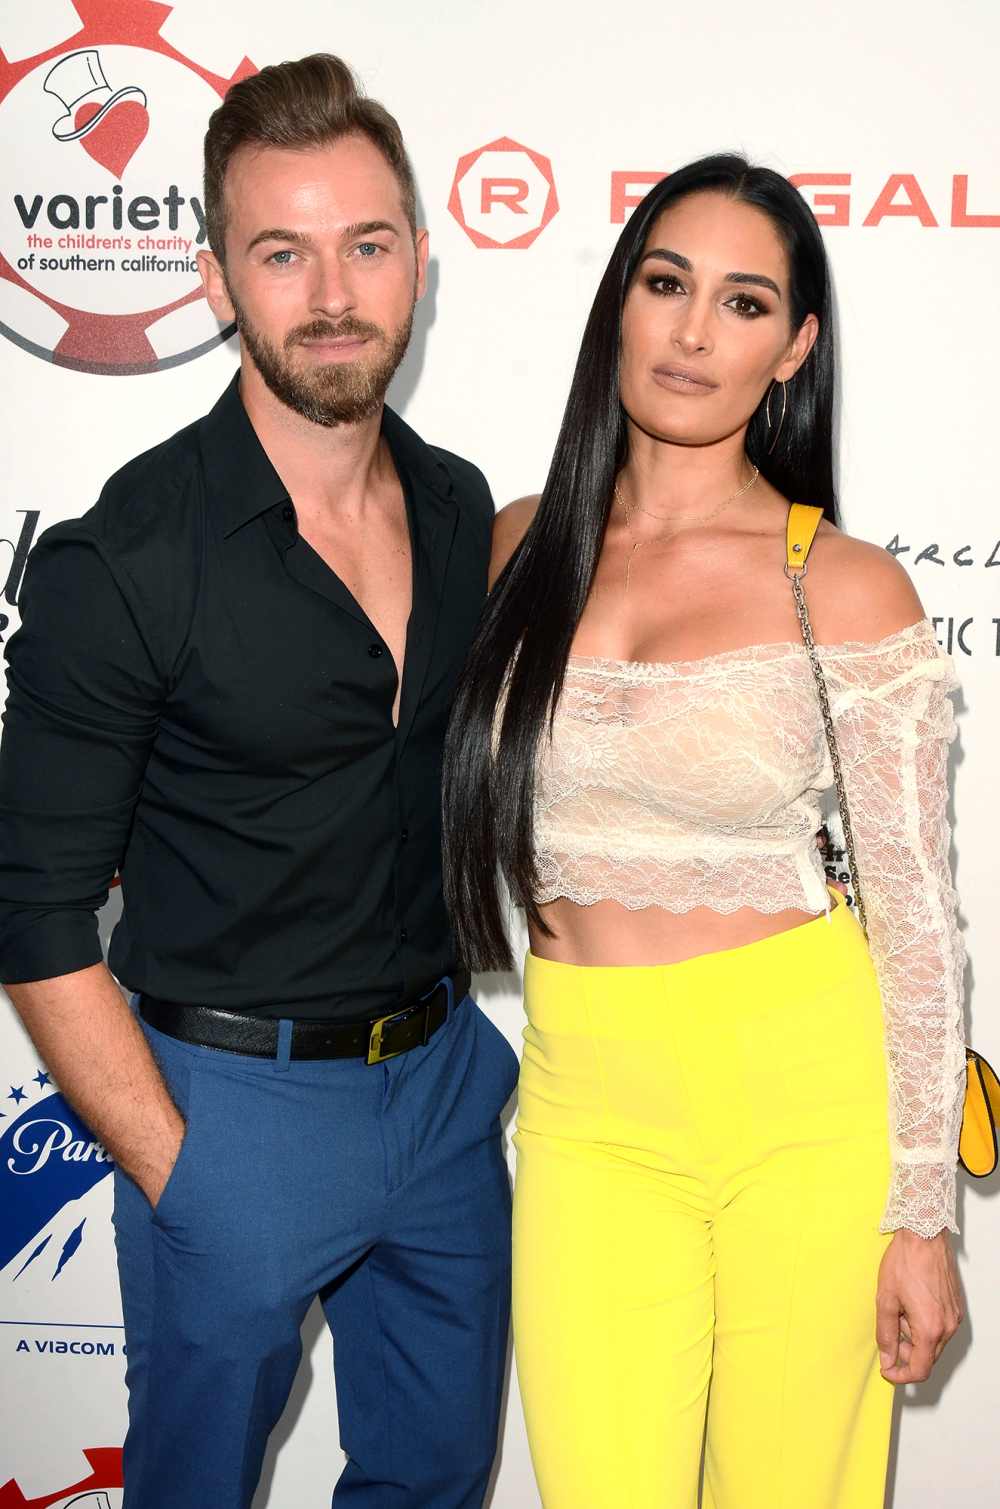 Nikki Bella Offered to Pause Her Relationship With Artem Chigvintsev Because She Was 'Healing'